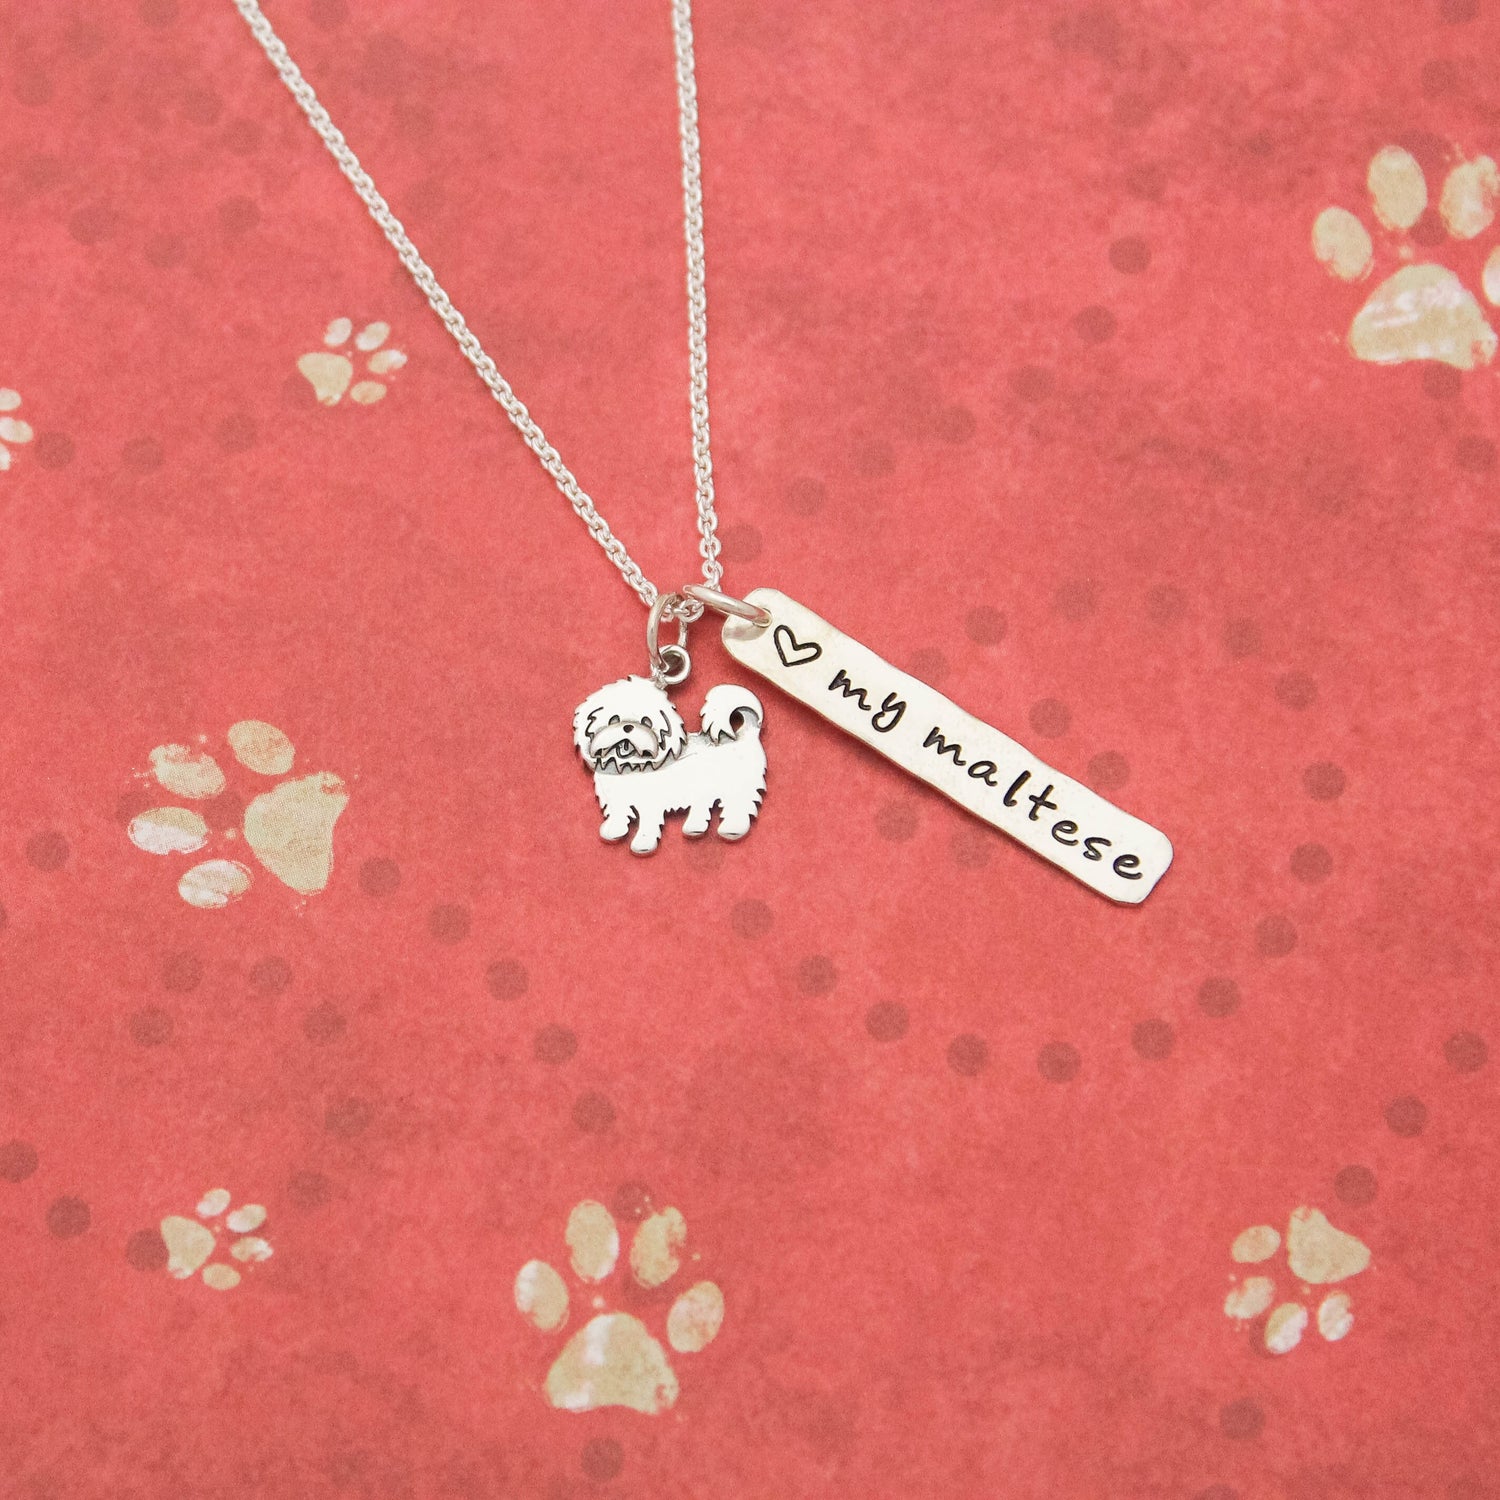 LOVE my MALTESE Necklace, Sterling Silver Dog Necklace, Maltese Lover Gift, New Pet Gift, Dog Maltese Jewelry, Maltese Necklace, Hand Stamp